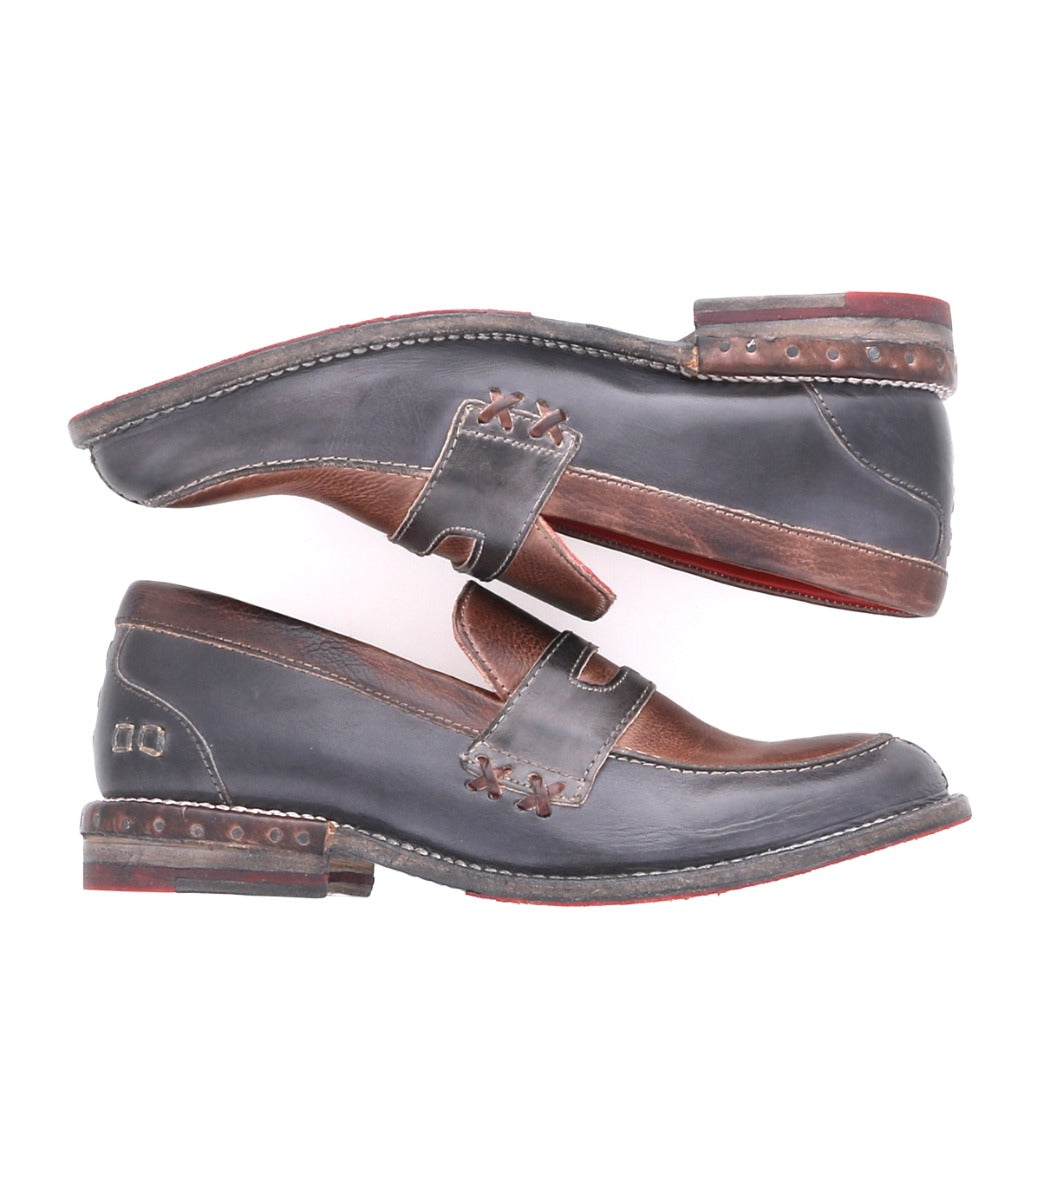 A pair of Bed Stu Reina women's shoes with brown and blue soles.